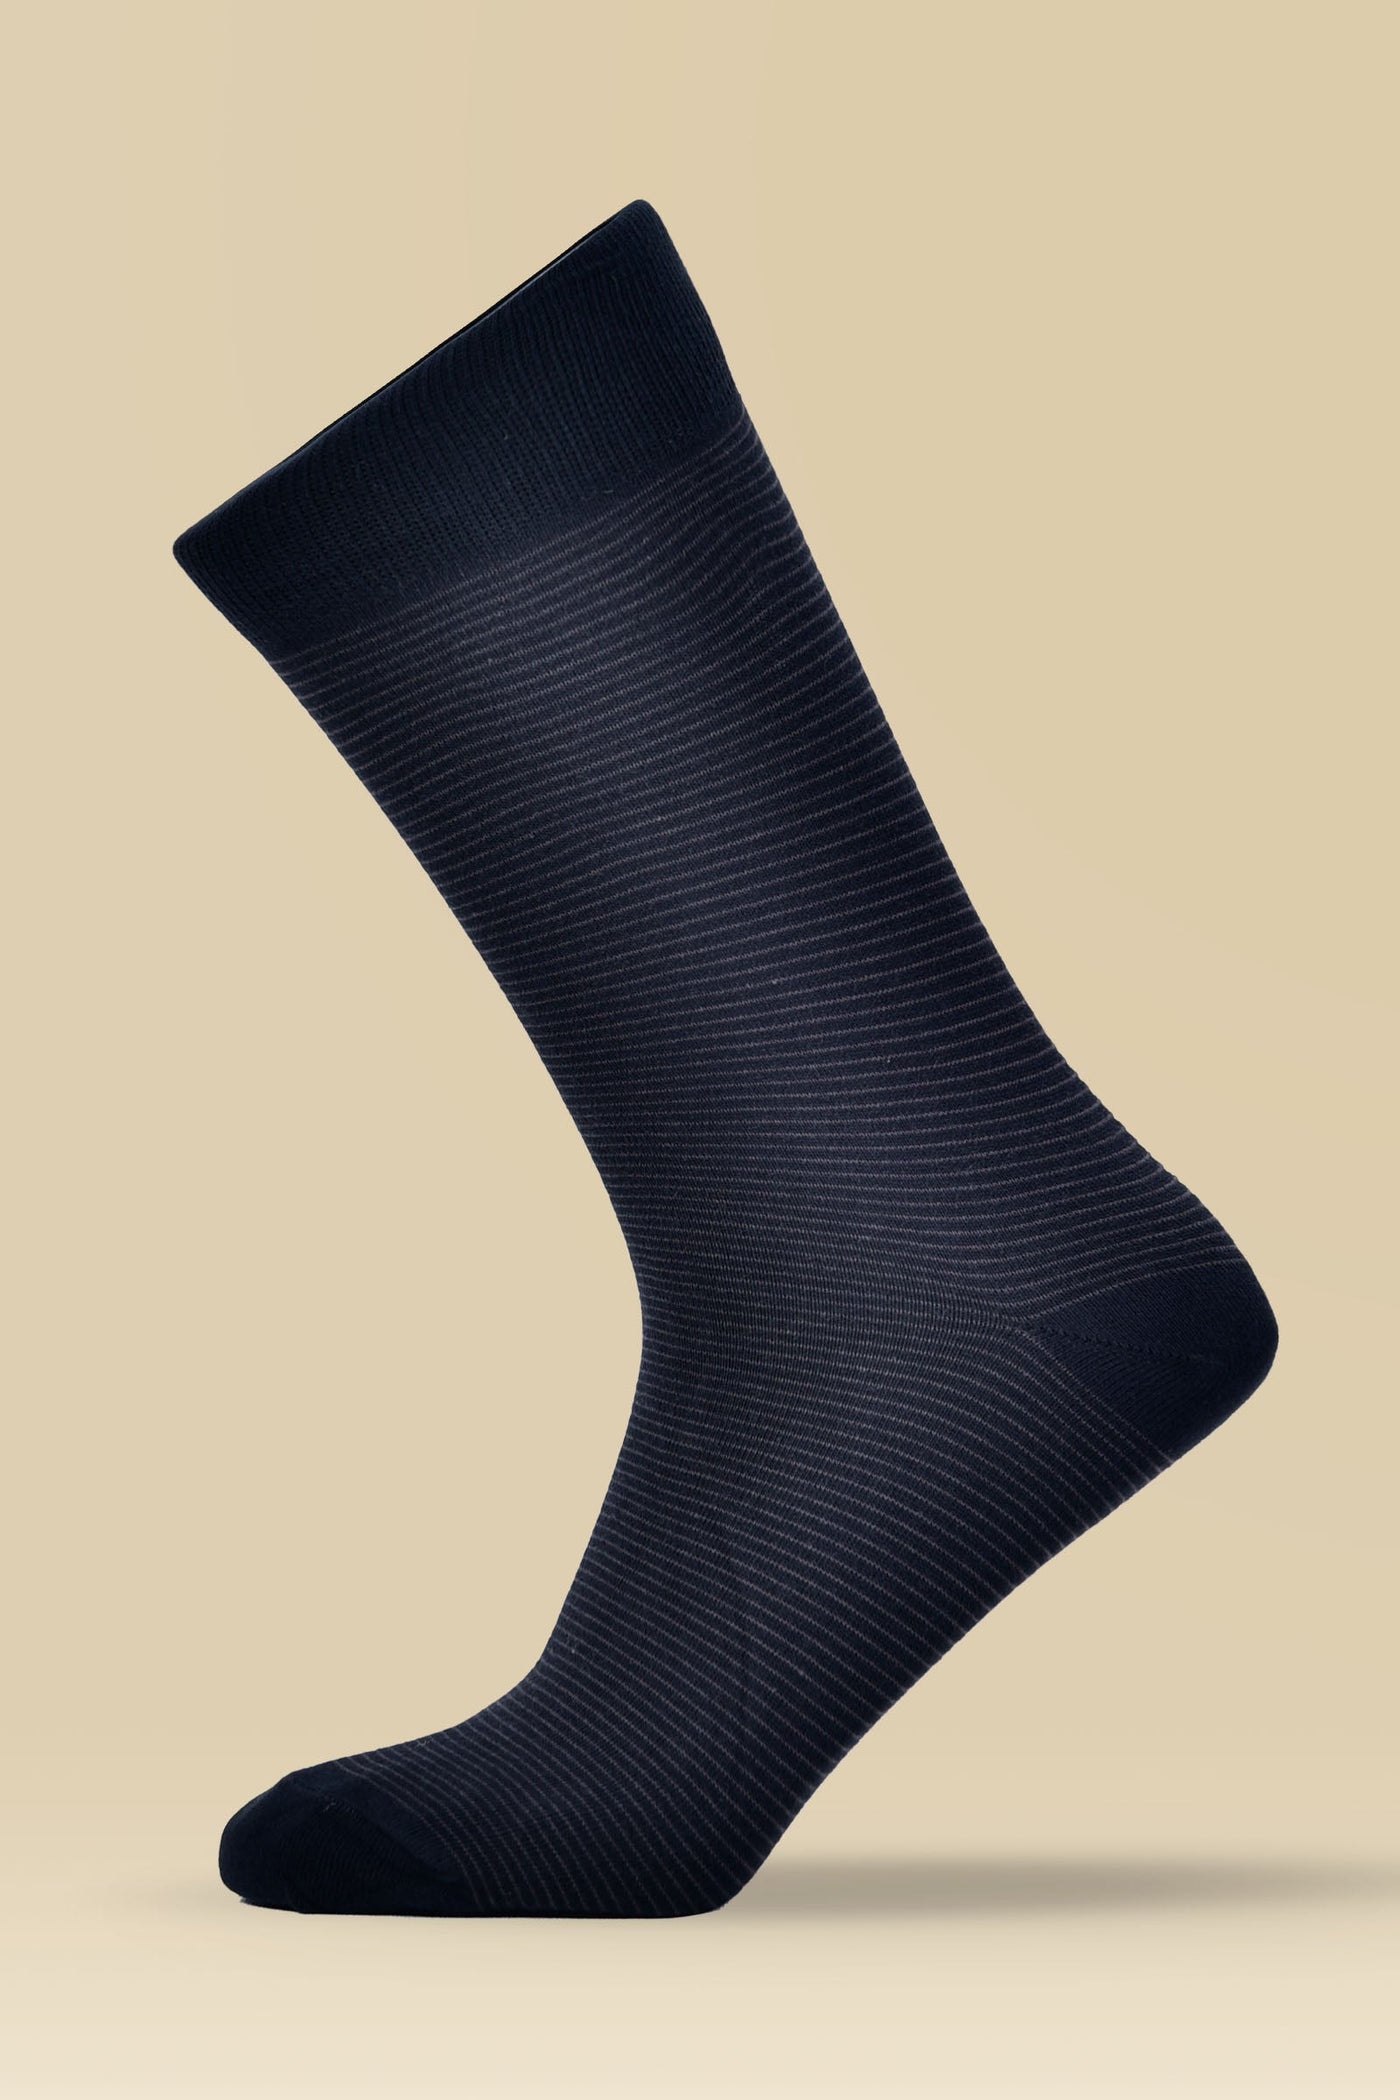 Black with Grey Striped Combed Cotton Socks